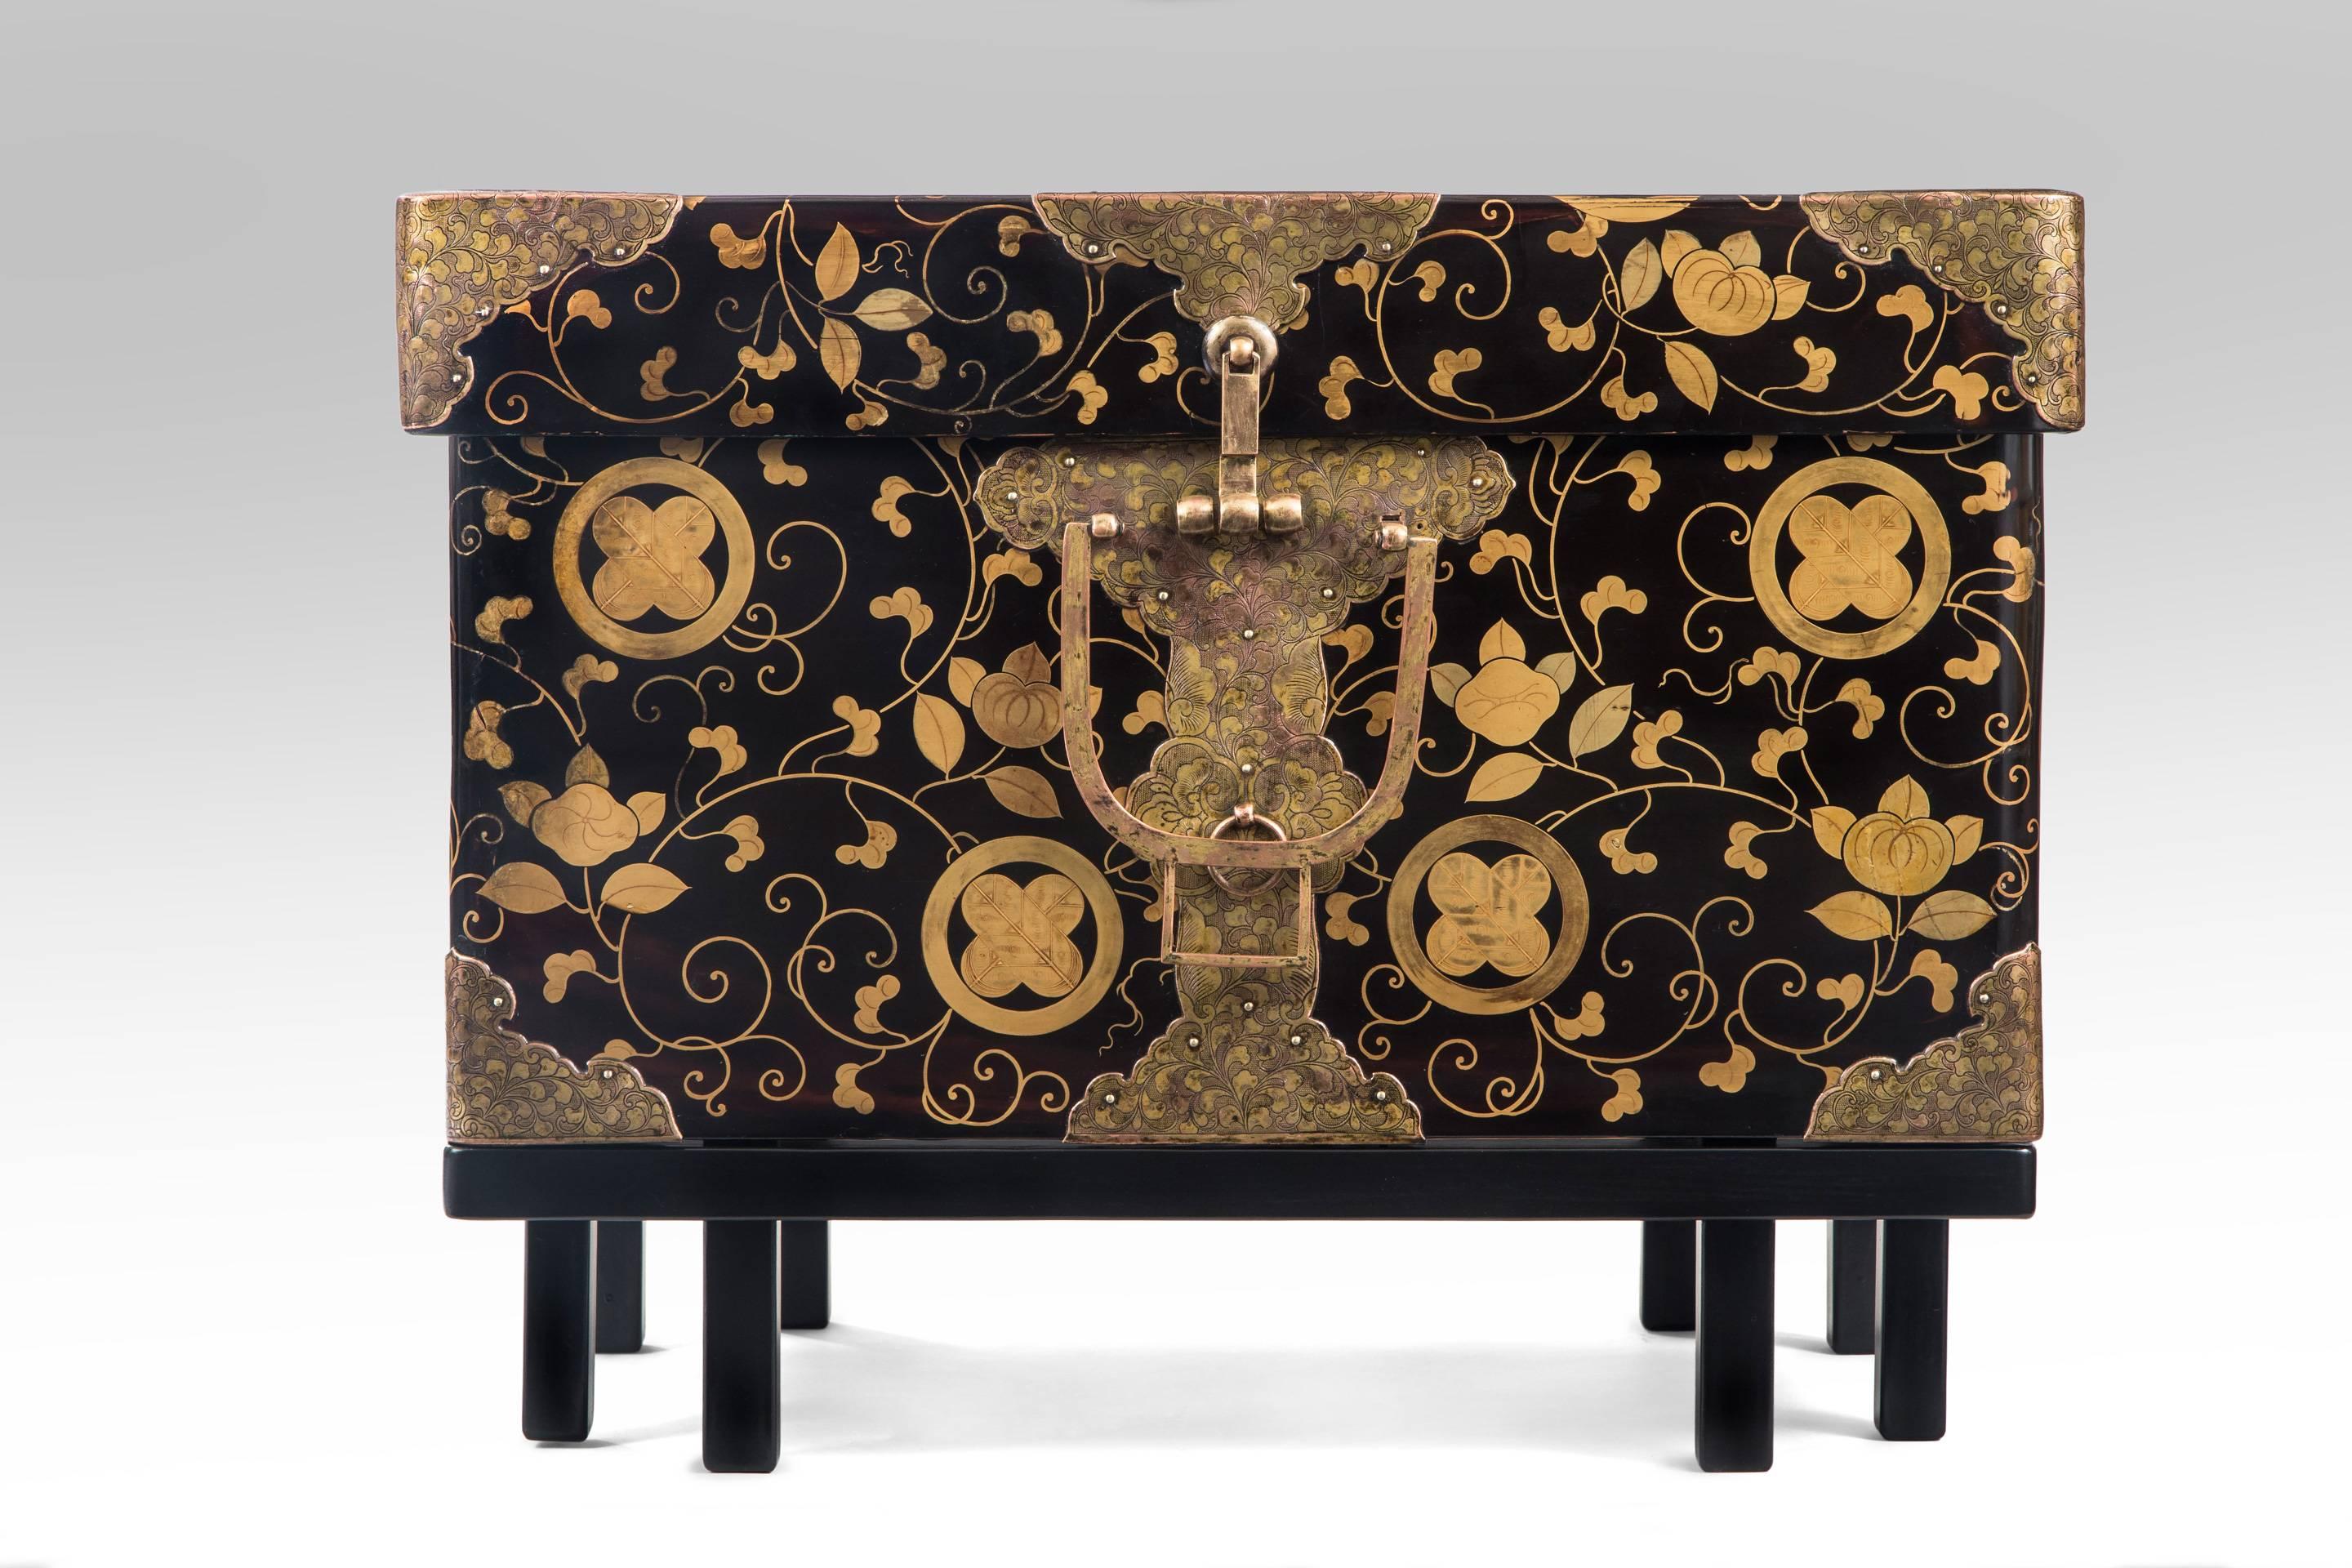 A Japanese Gilt Metal Mounted and Lacquer Hasami-Bako (Robe Chest / Box)
The whole adorned in hawk feather kamons against a trailing vine on black background, the rectangular lid fitted to a conforming base, the gilt mounts engraved scrolling vines,